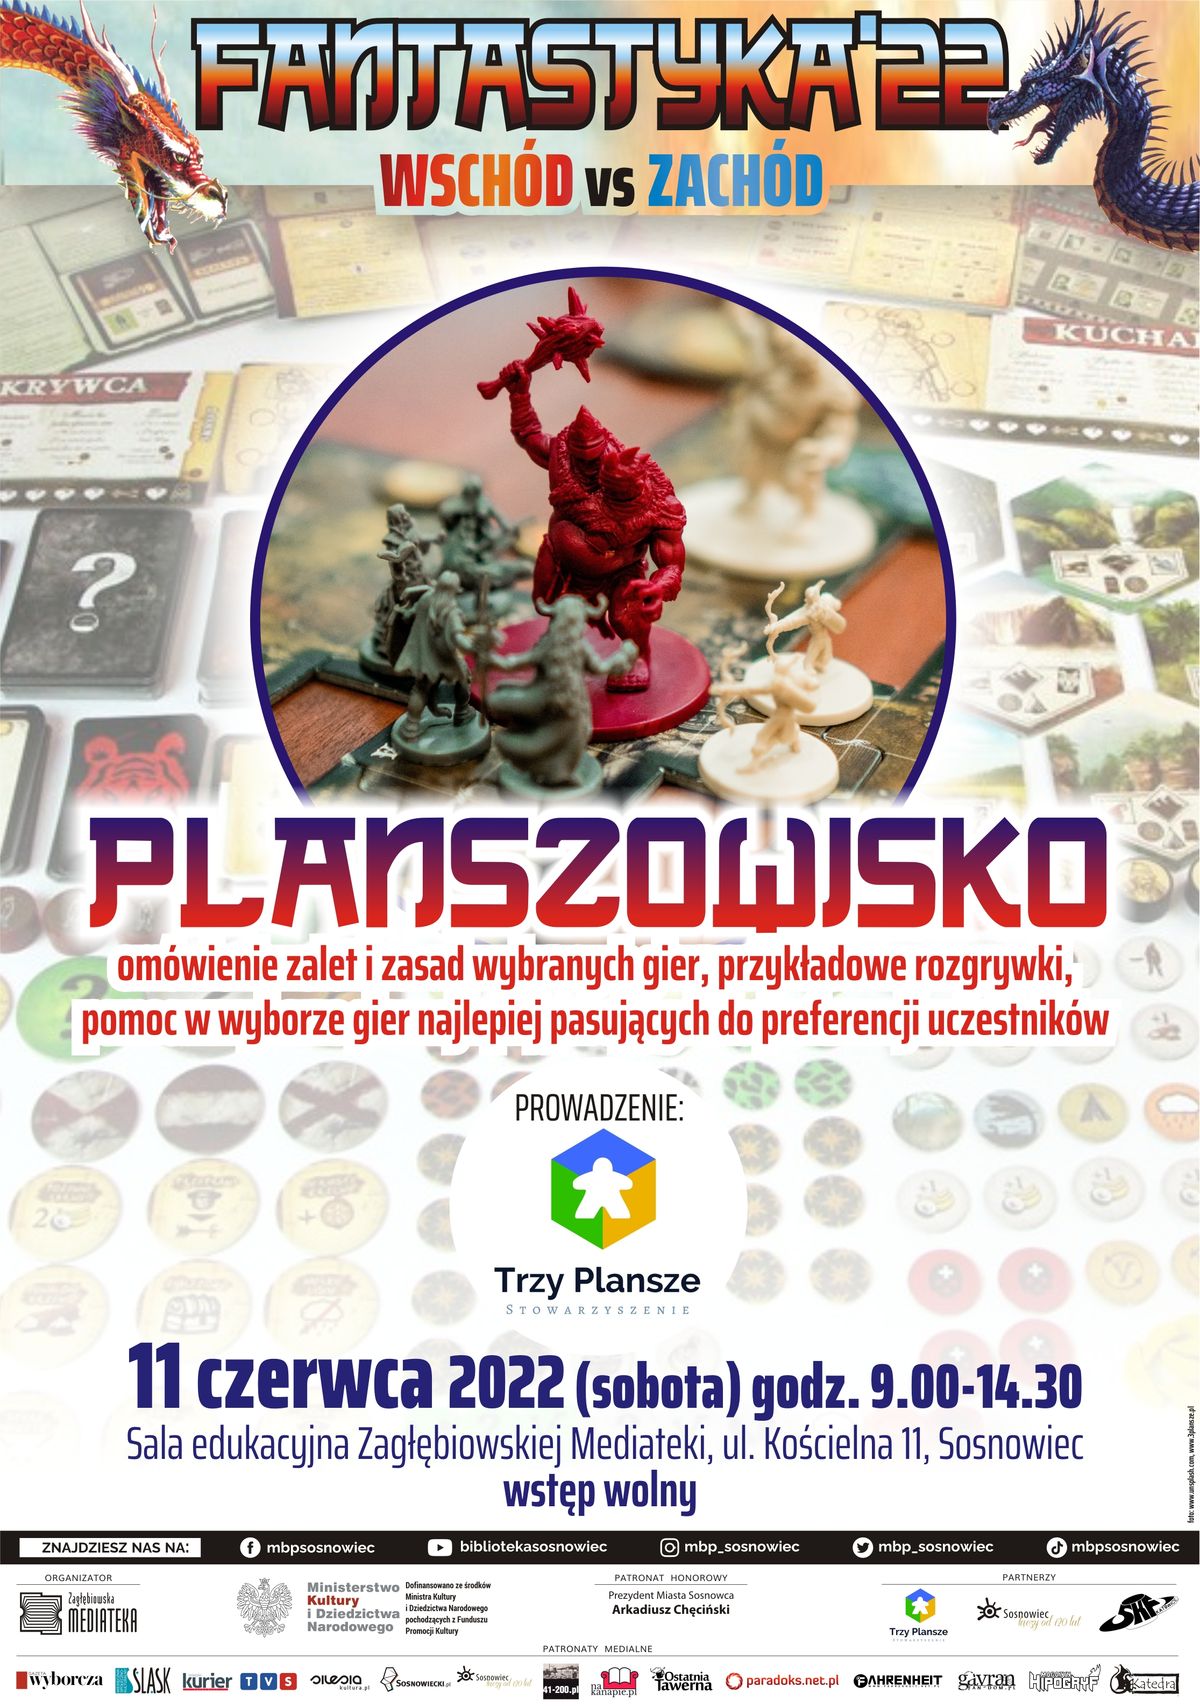 The poster_plakat